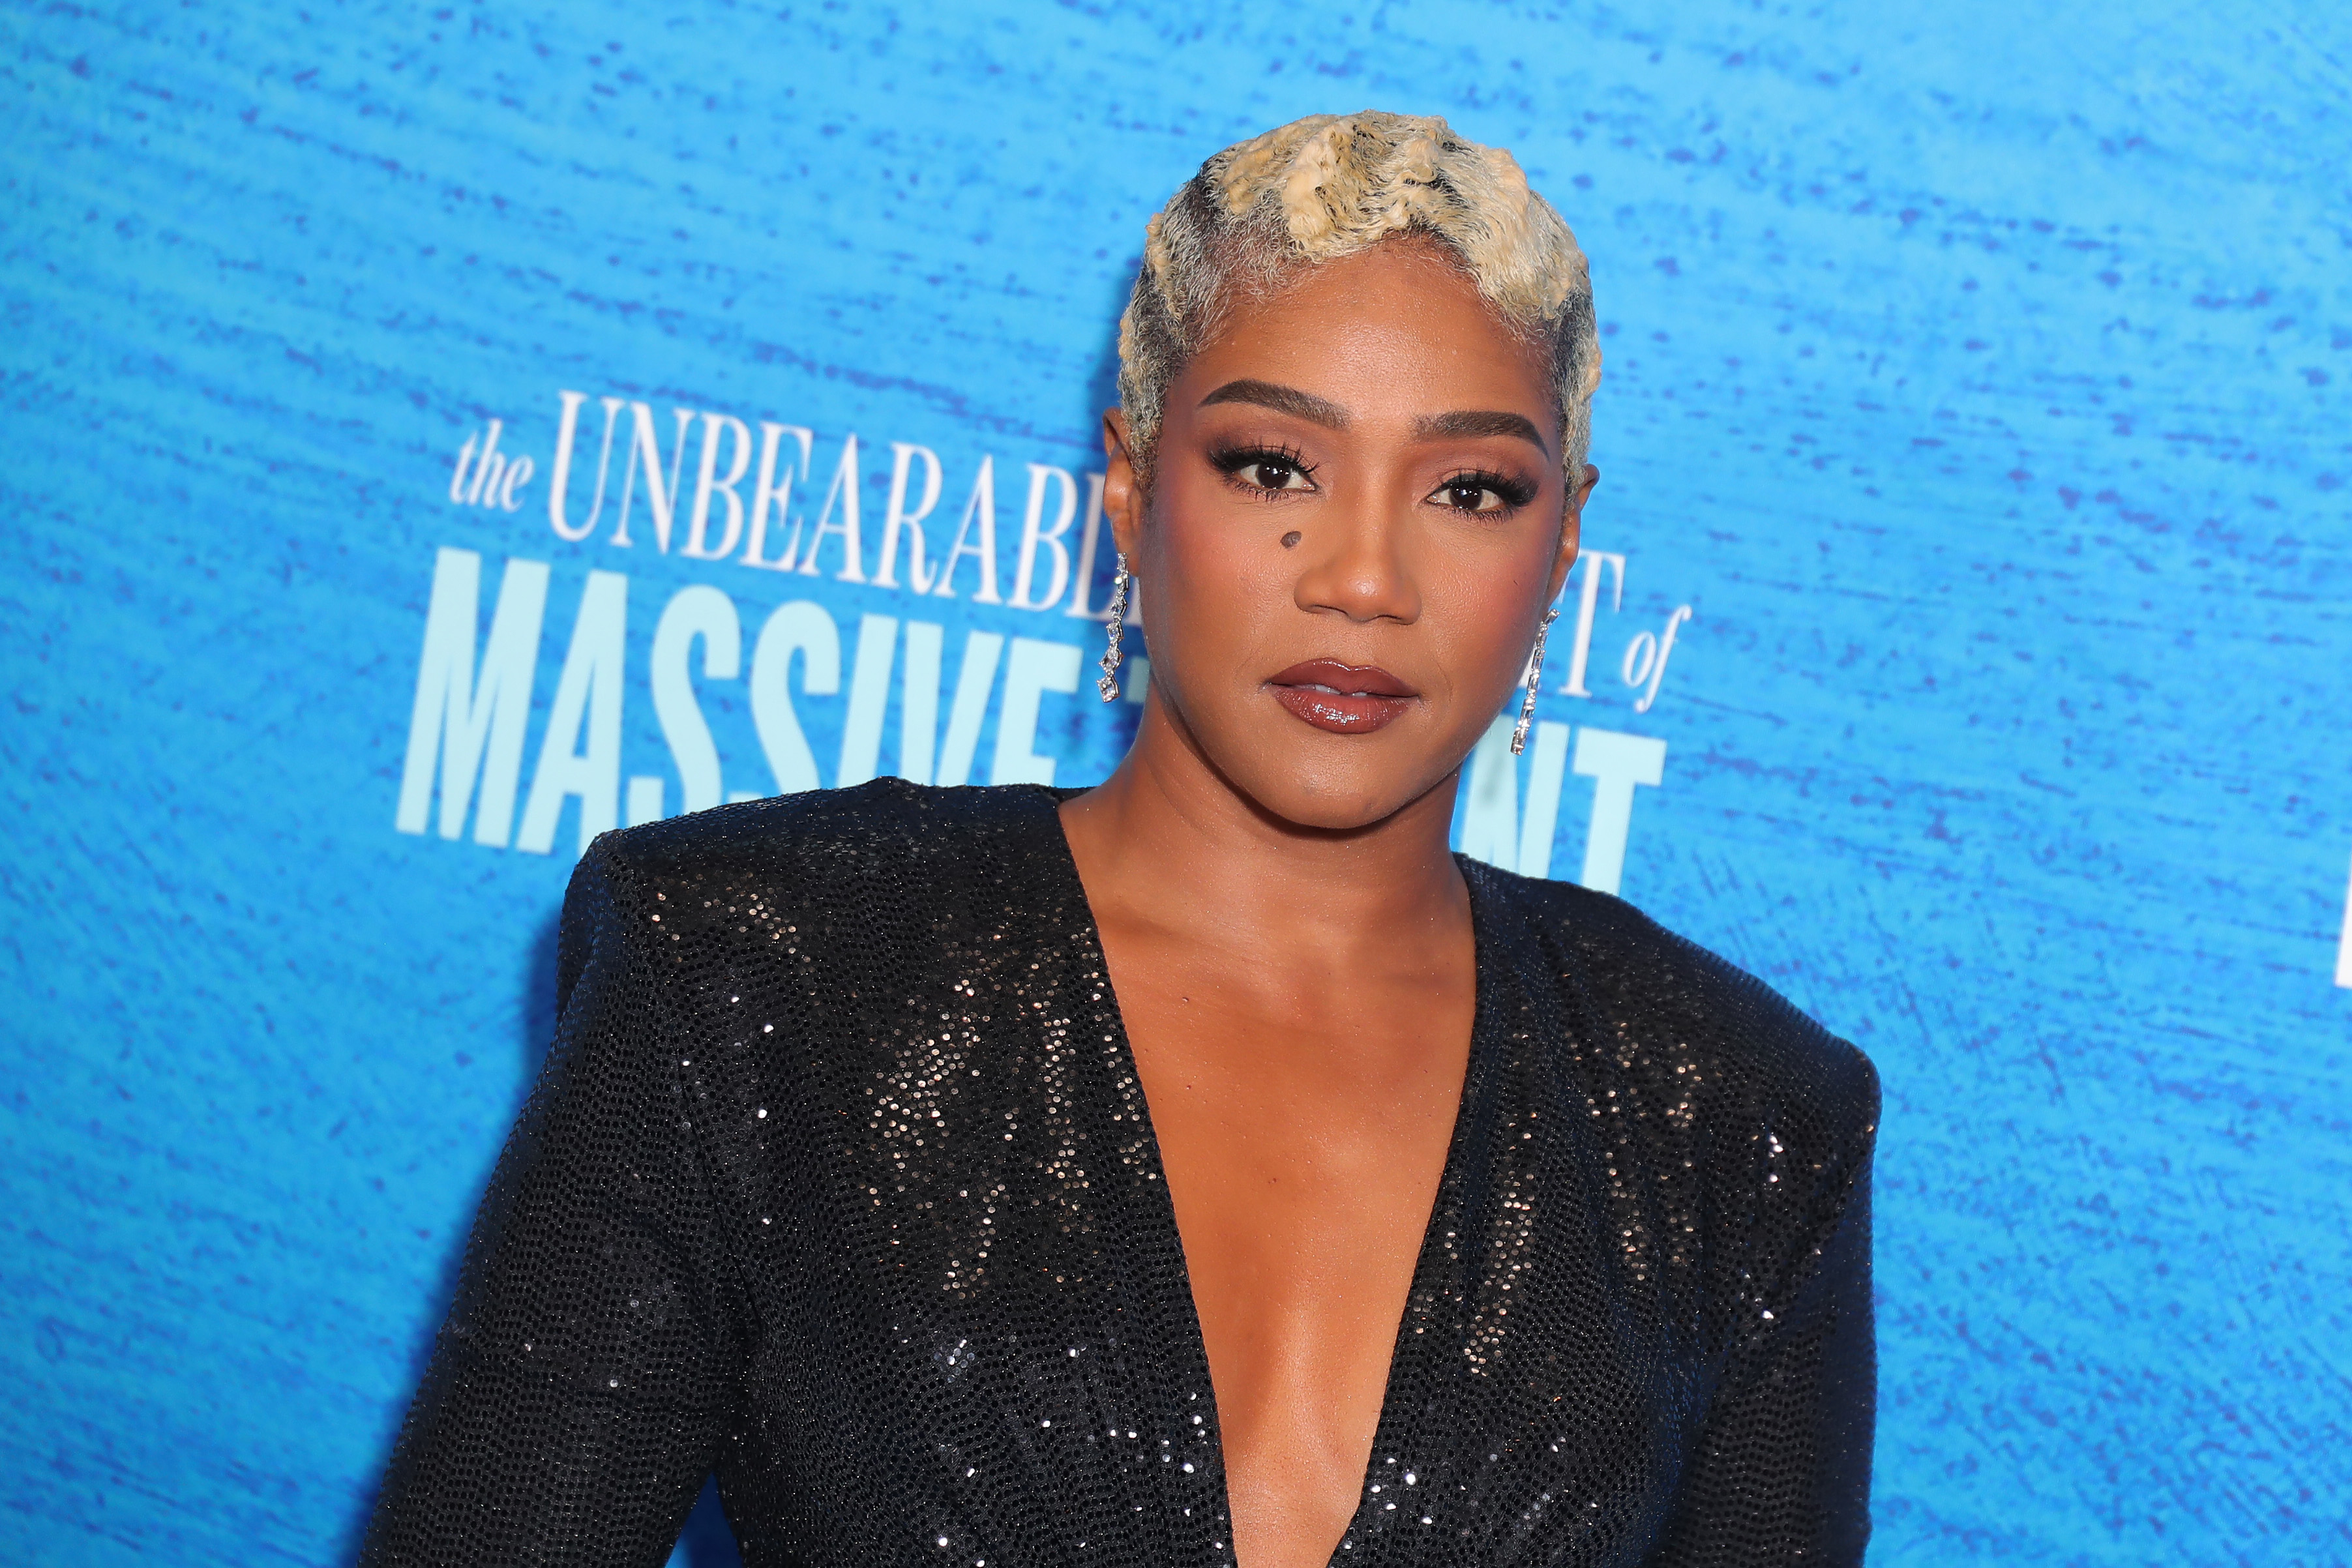 Tiffany Haddish poses in a black sequined dress with short blonde hair at an event